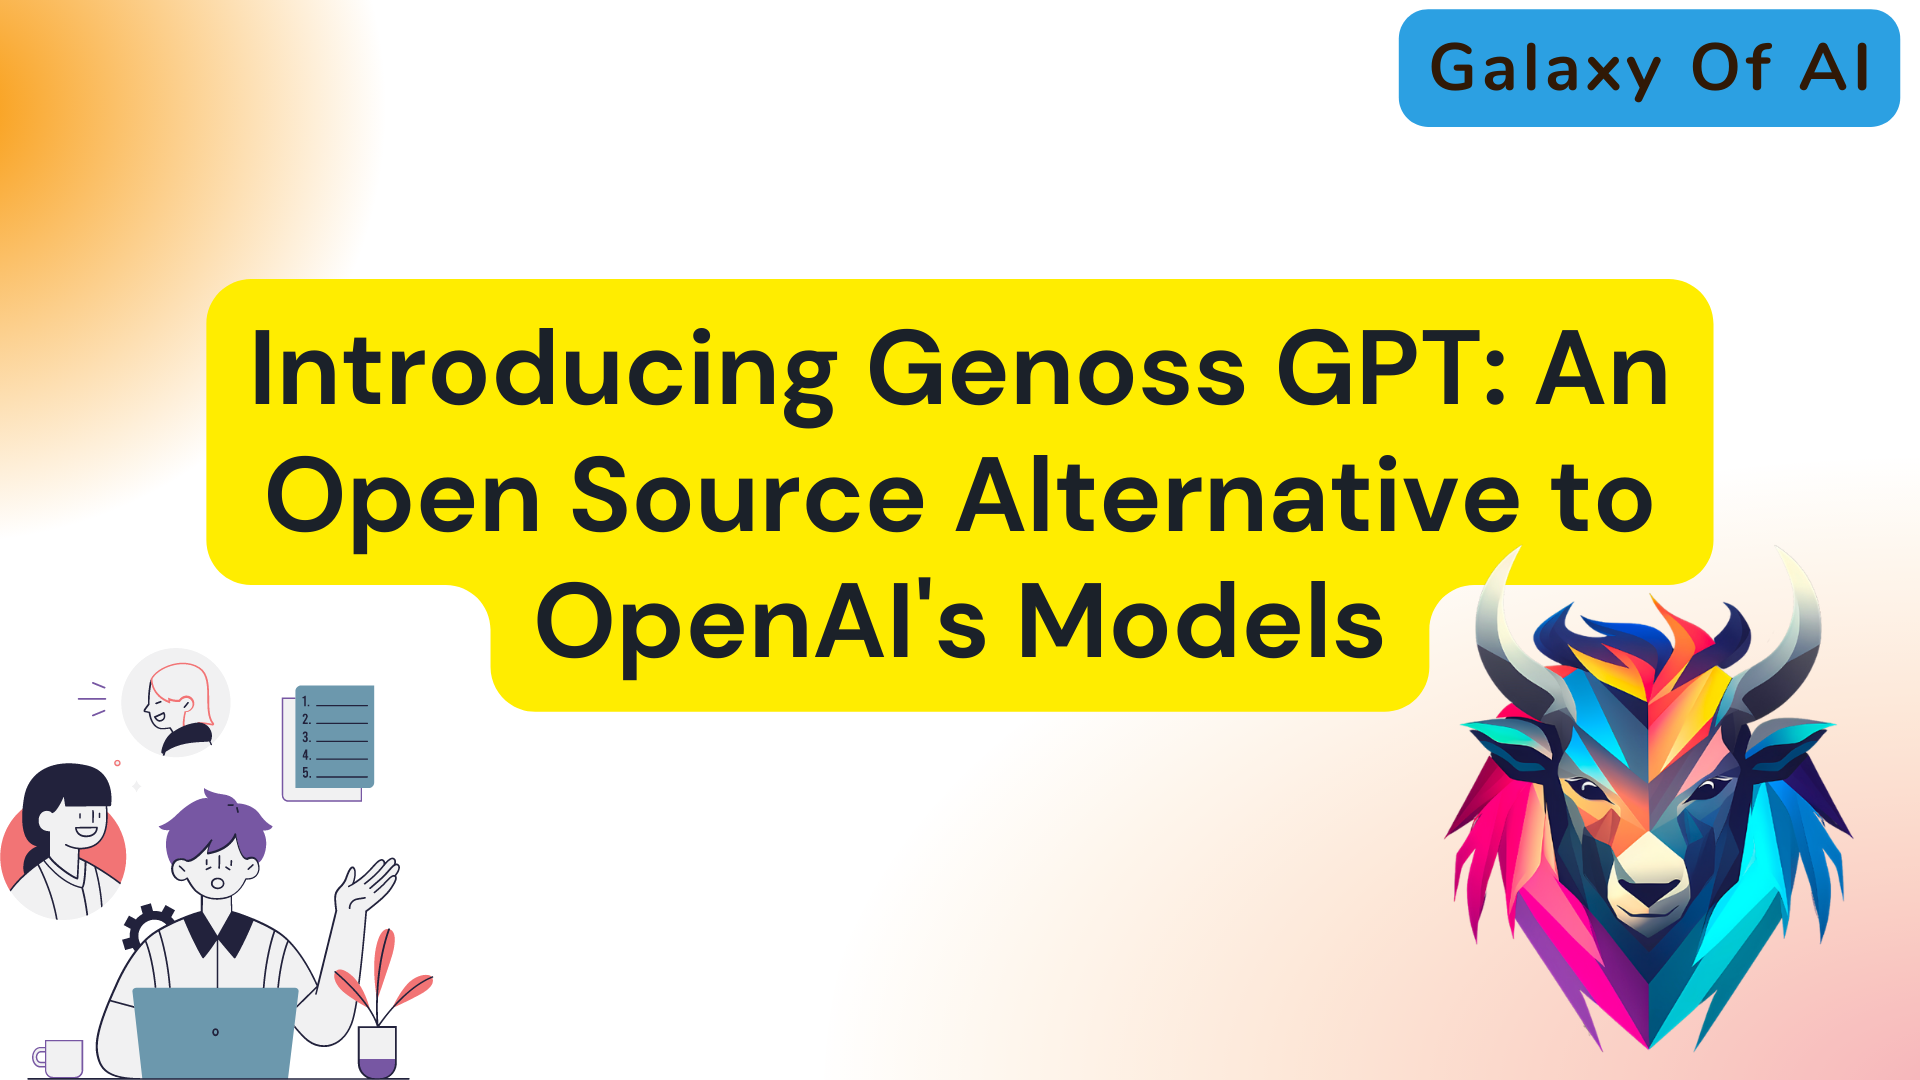 in this post, we discuss Introducing Genoss GPT: An Open Source Alternative to OpenAI's Models.